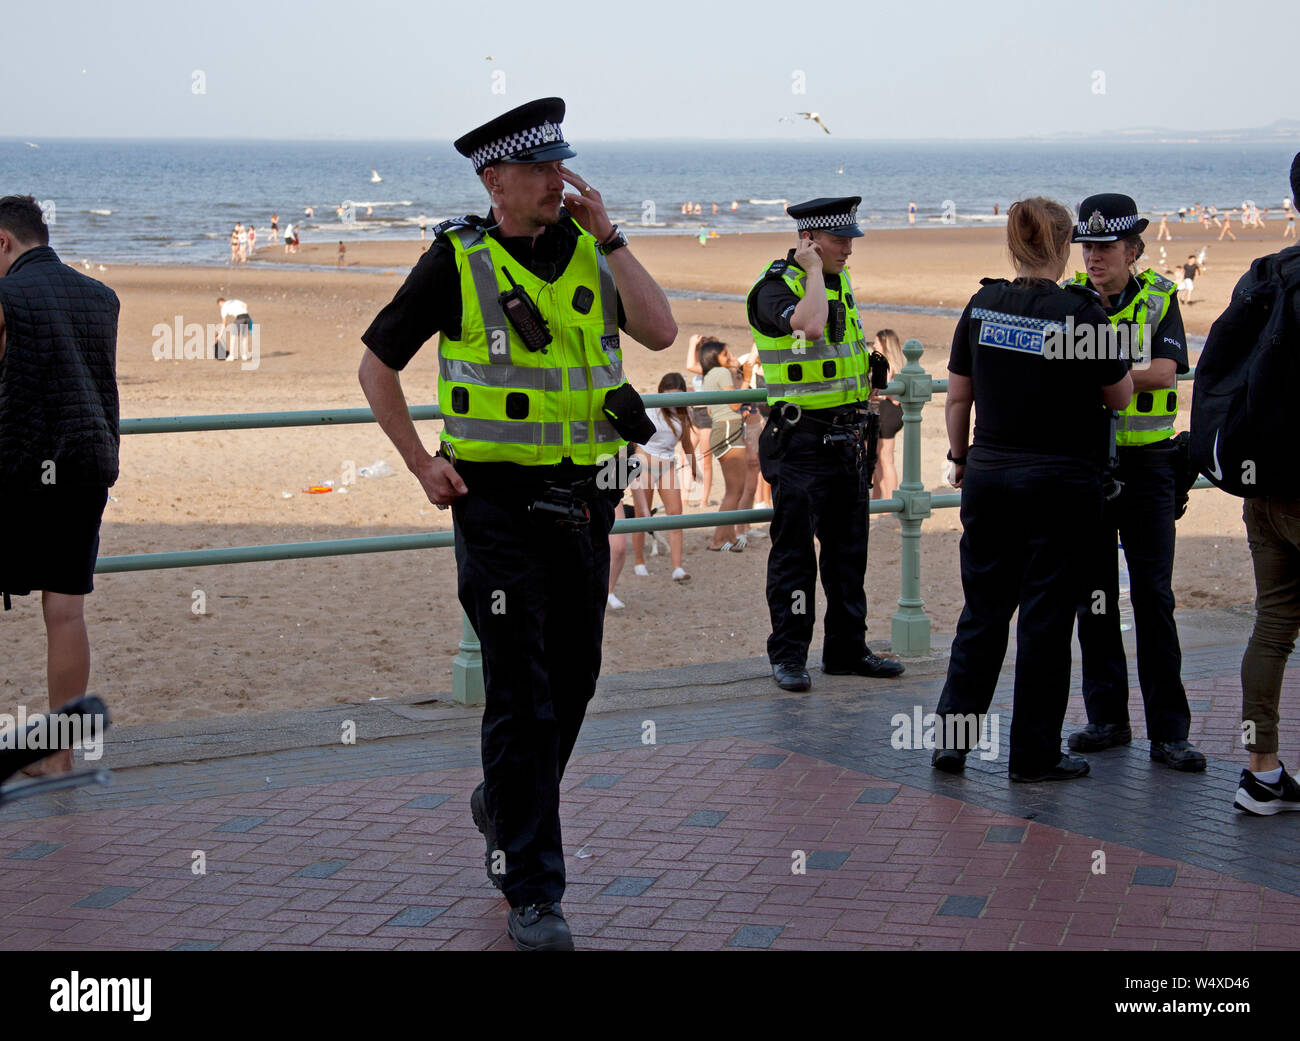 Portobello, Edinburgh, Scotland, UK. 25th July 2019. At around 17.30 on Thursday evening at least ten Police cars where in evidence beside the promenade as they had been called regarding trouble occurring between youths on Portobello Beach. By 18.30 most of the youths had been dispersed. Leaving a mess on the sand of discarded clothing and rubbish. Stock Photo